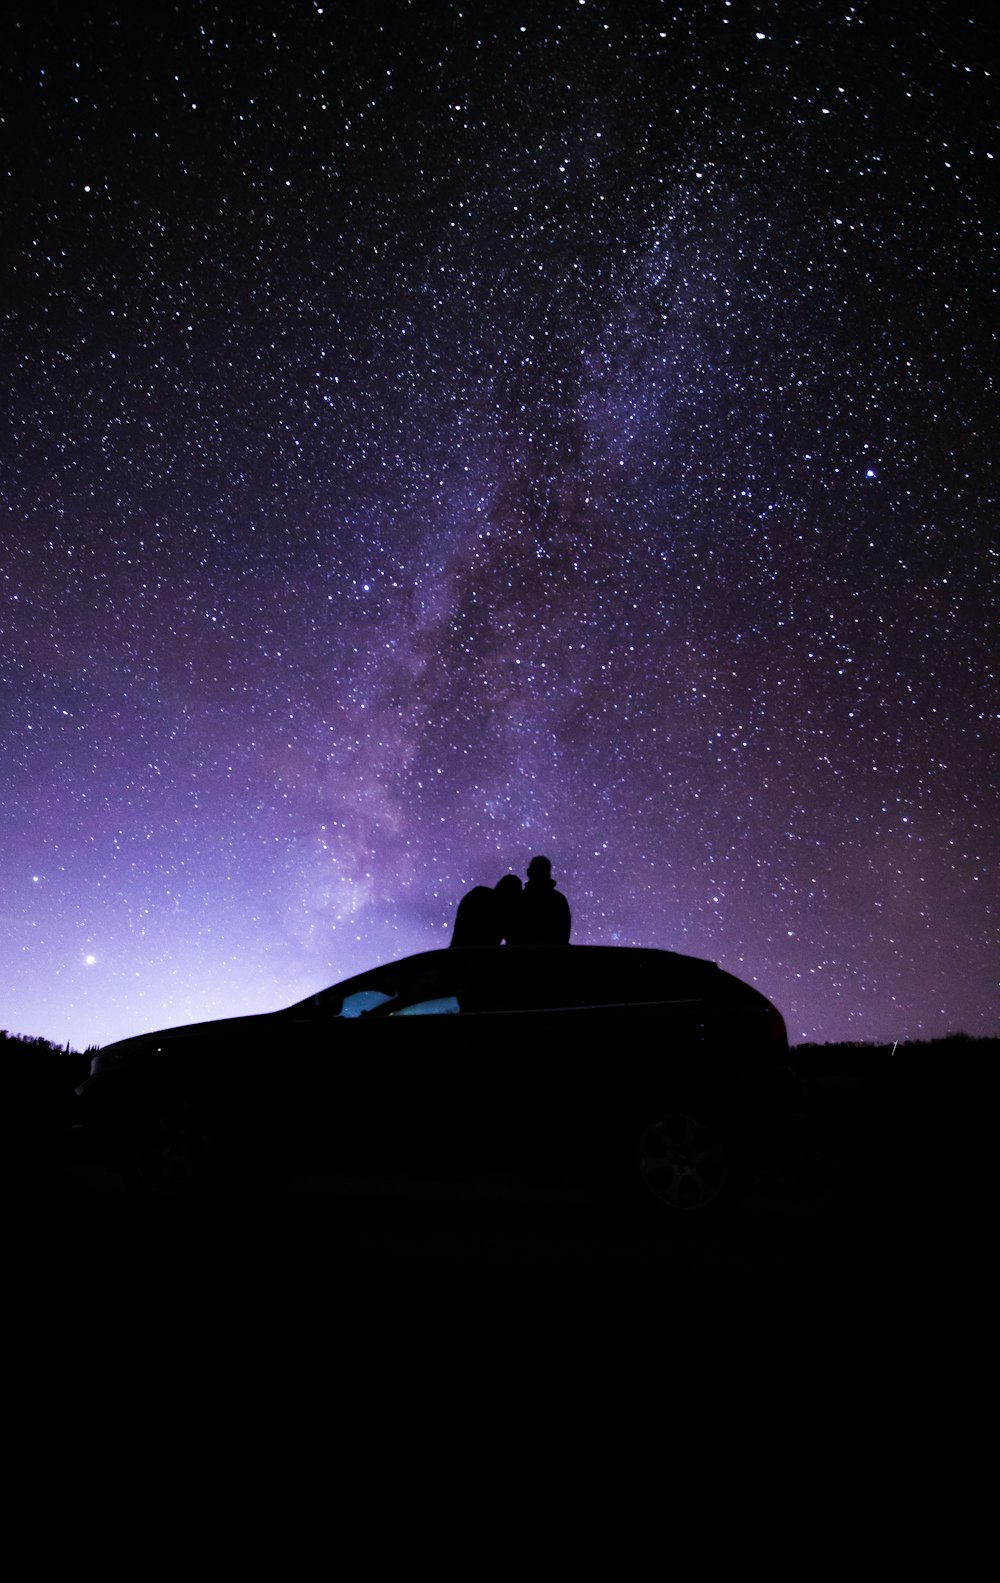 silhouette of person sitting on car under starry night